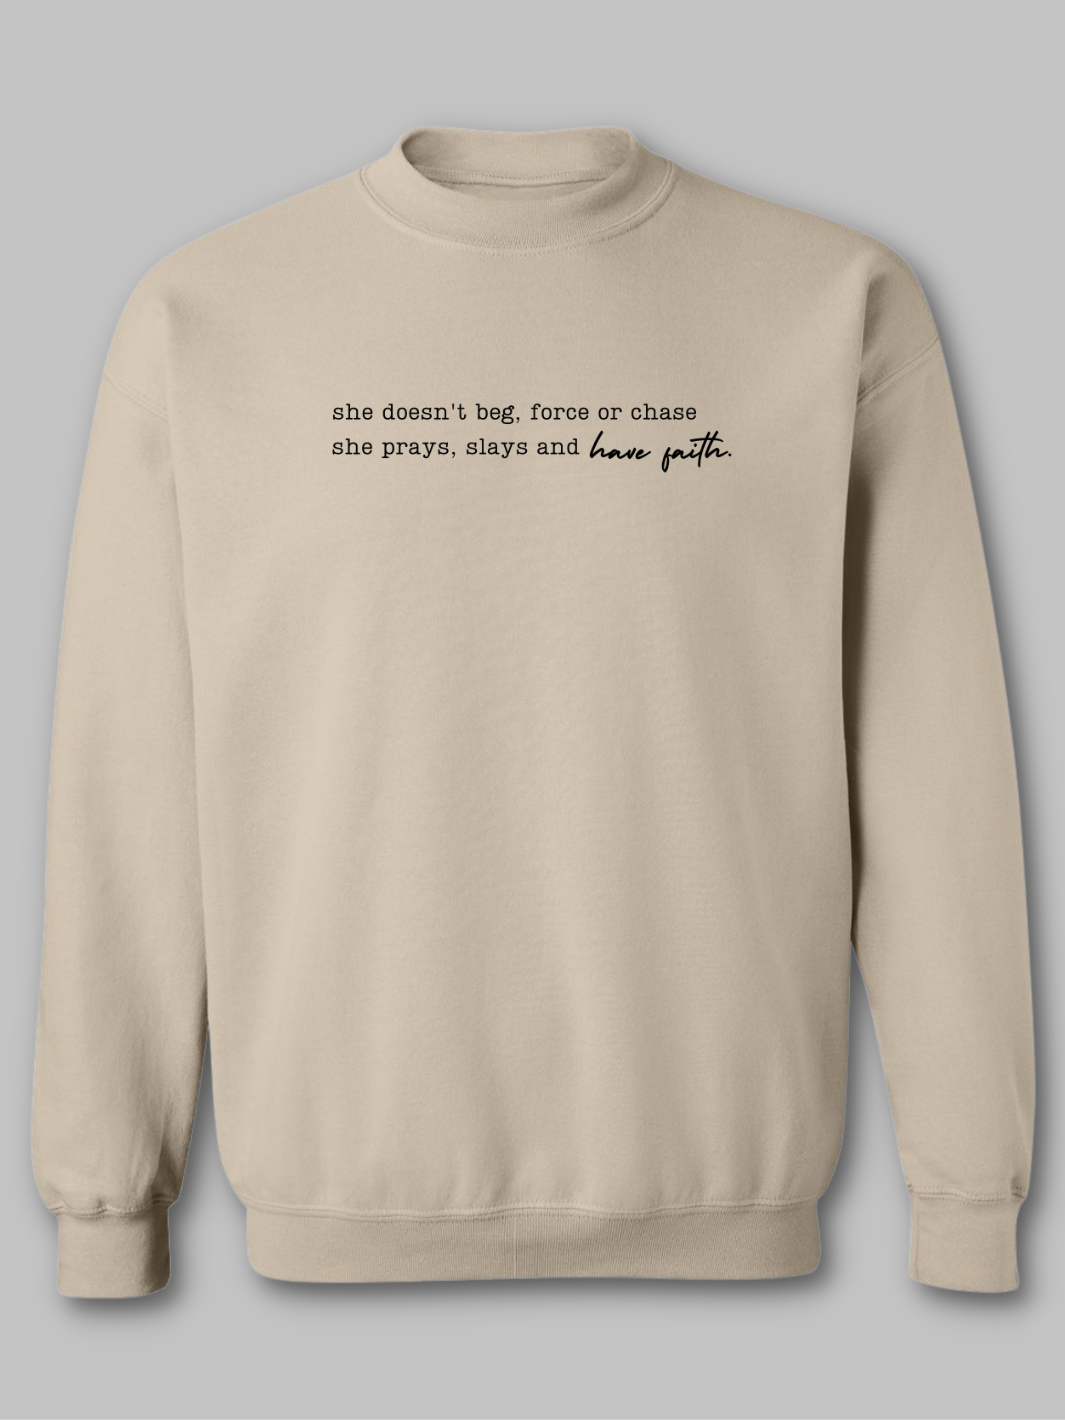 Image of a  Tan, sand, Khaki christian based crewneck sweatshirt featuring the inspirational phrase 'Don't Chase, Have Faith' prominently displayed on the front. The text is styled in black bold and script font  contrasting against the sweatshirts neutral colored sweatshirt background. The design conveys a message of patience and trust in God. Faith Based Sweatshirt